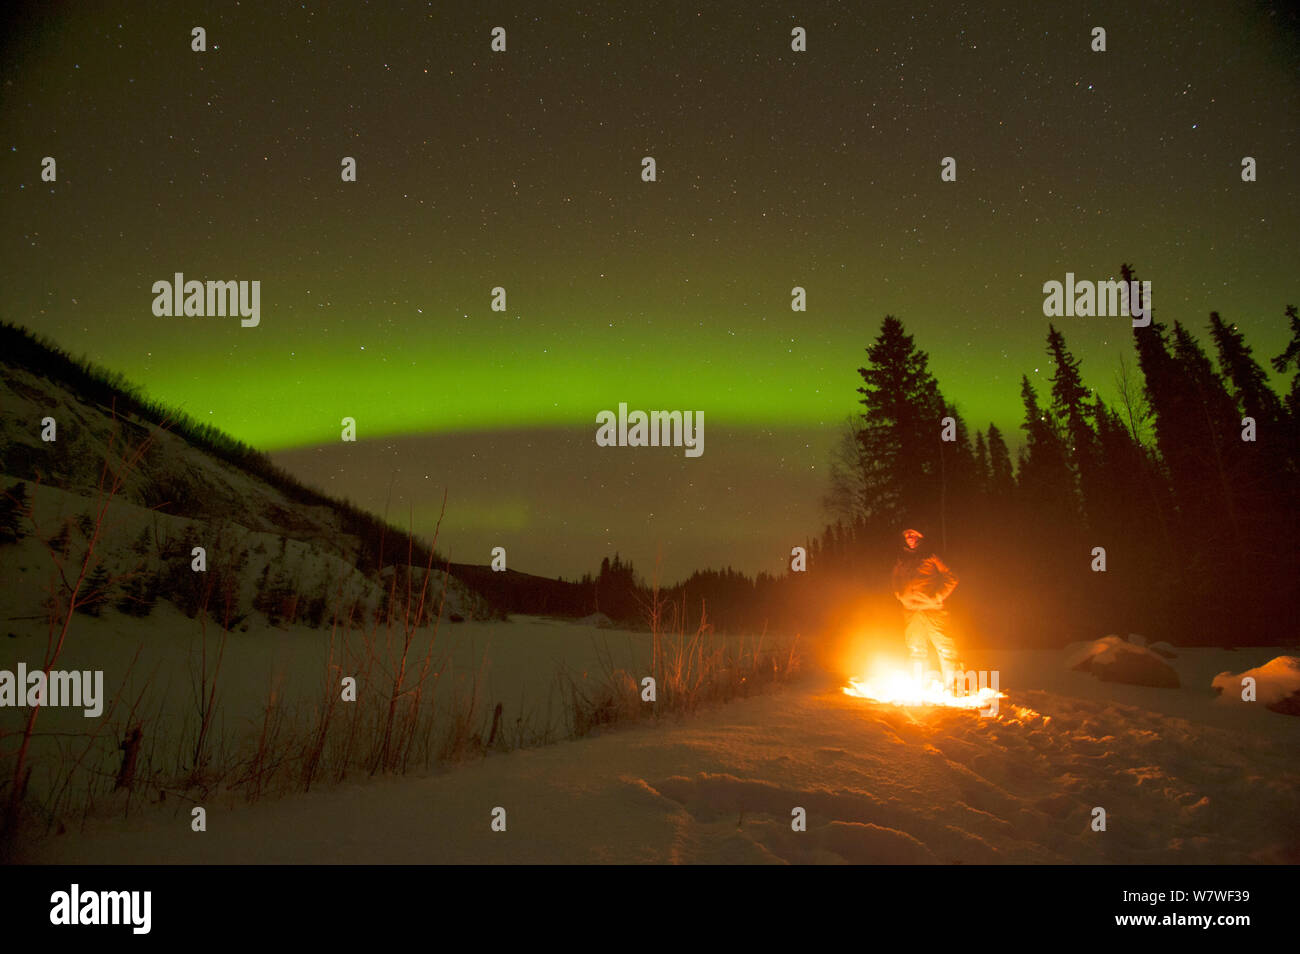 Northern lights (Aurora borealis) glowing brightly over a man enjoying a hot campfire in the Chena River State Recreational Area, outside of Fairbanks, Interior of Alaska, November 2013. Stock Photo